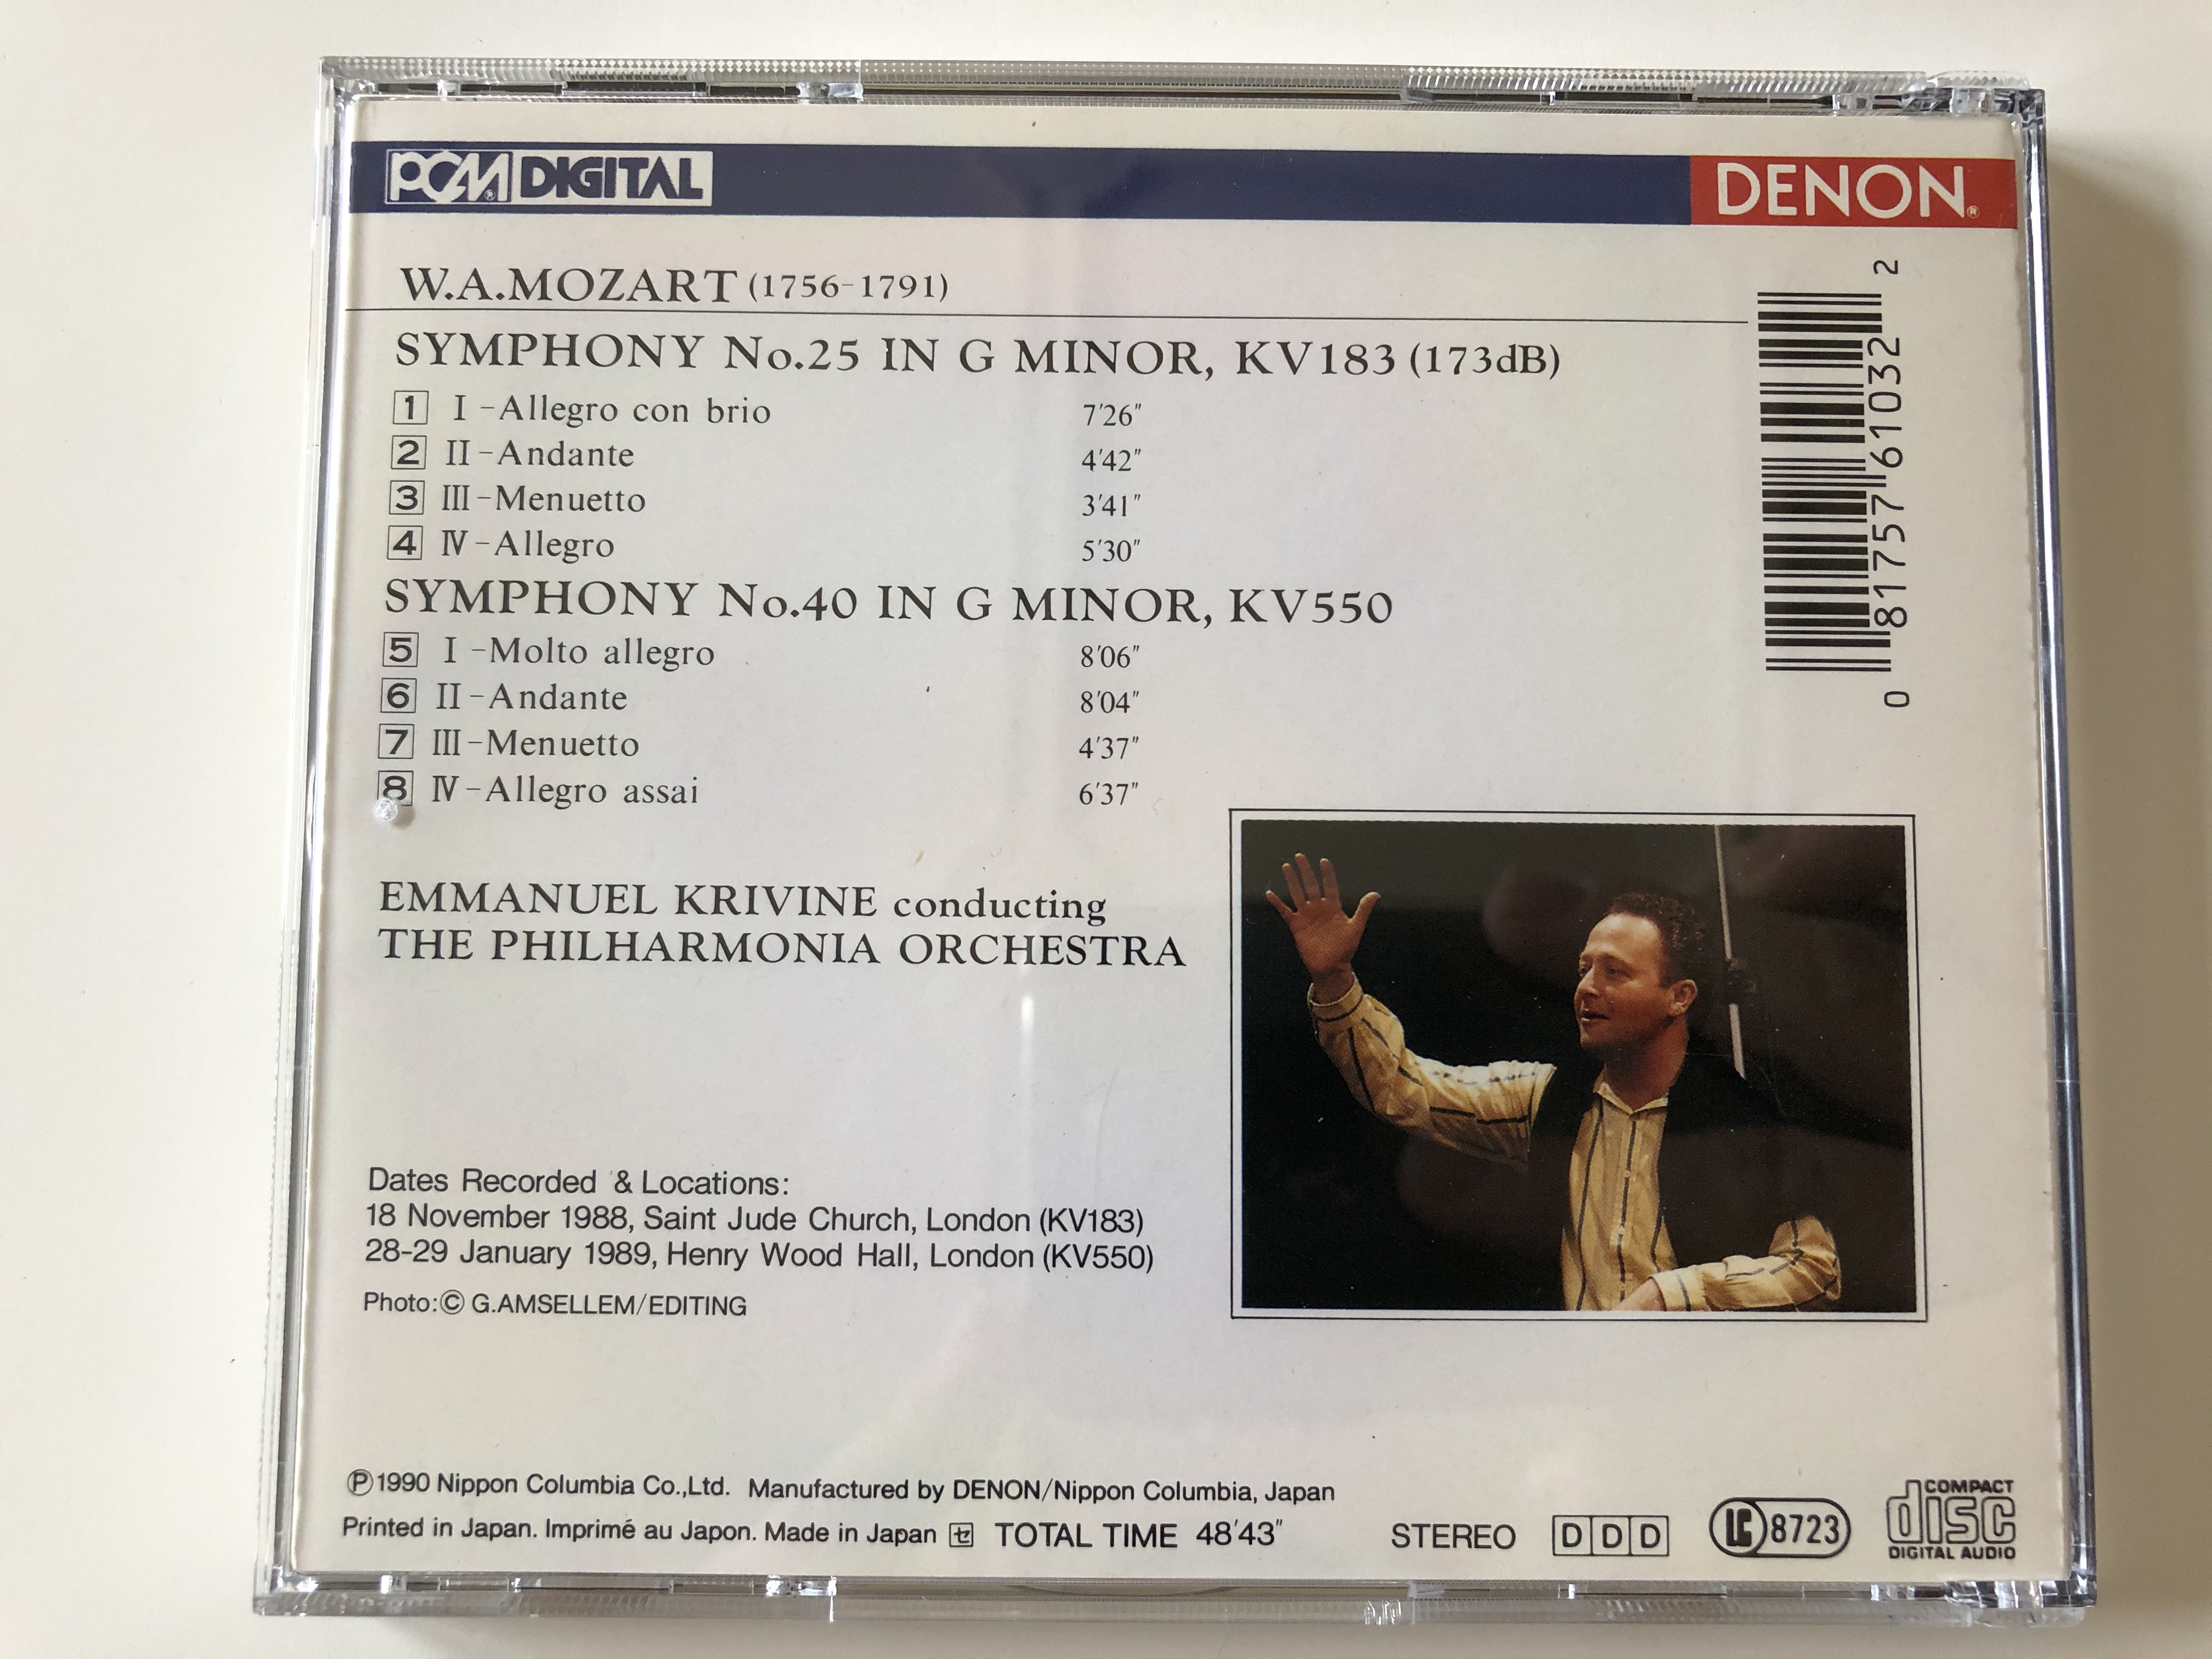 w.-a.-mozart-symphonies-nos.-25-40-emmanuel-krivine-the-philharmonia-orchestra-nippon-columbia-co.-audio-cd-1990-stereo-co-76103-7-.jpg